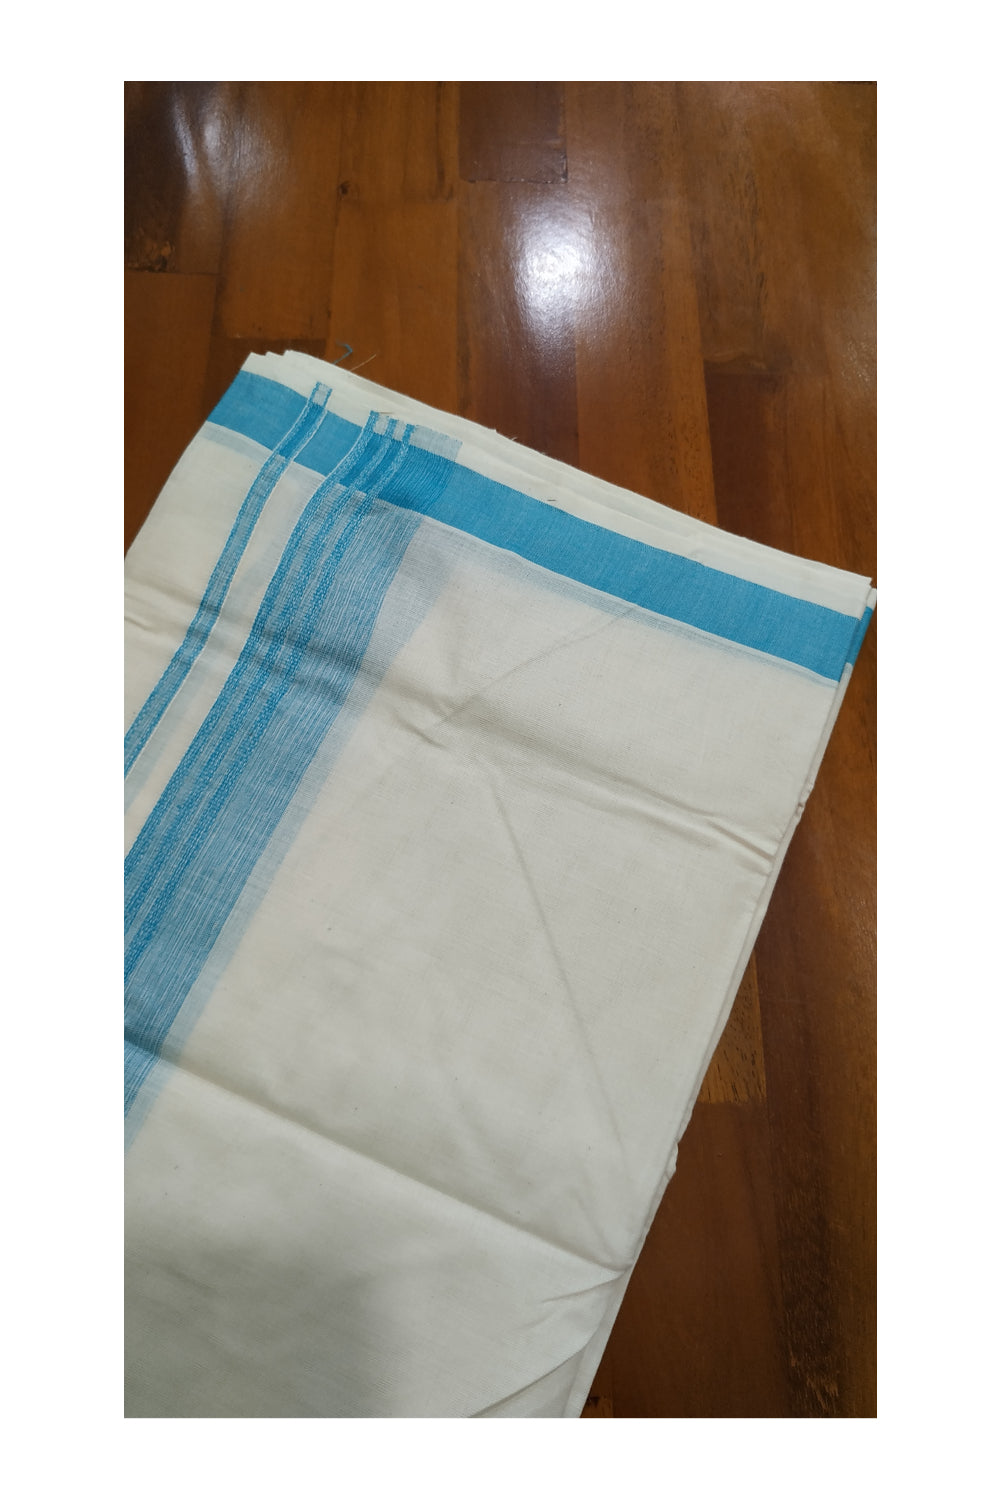 Off White Pure Cotton Mundu with Light Blue Border (South Indian Dhoti)